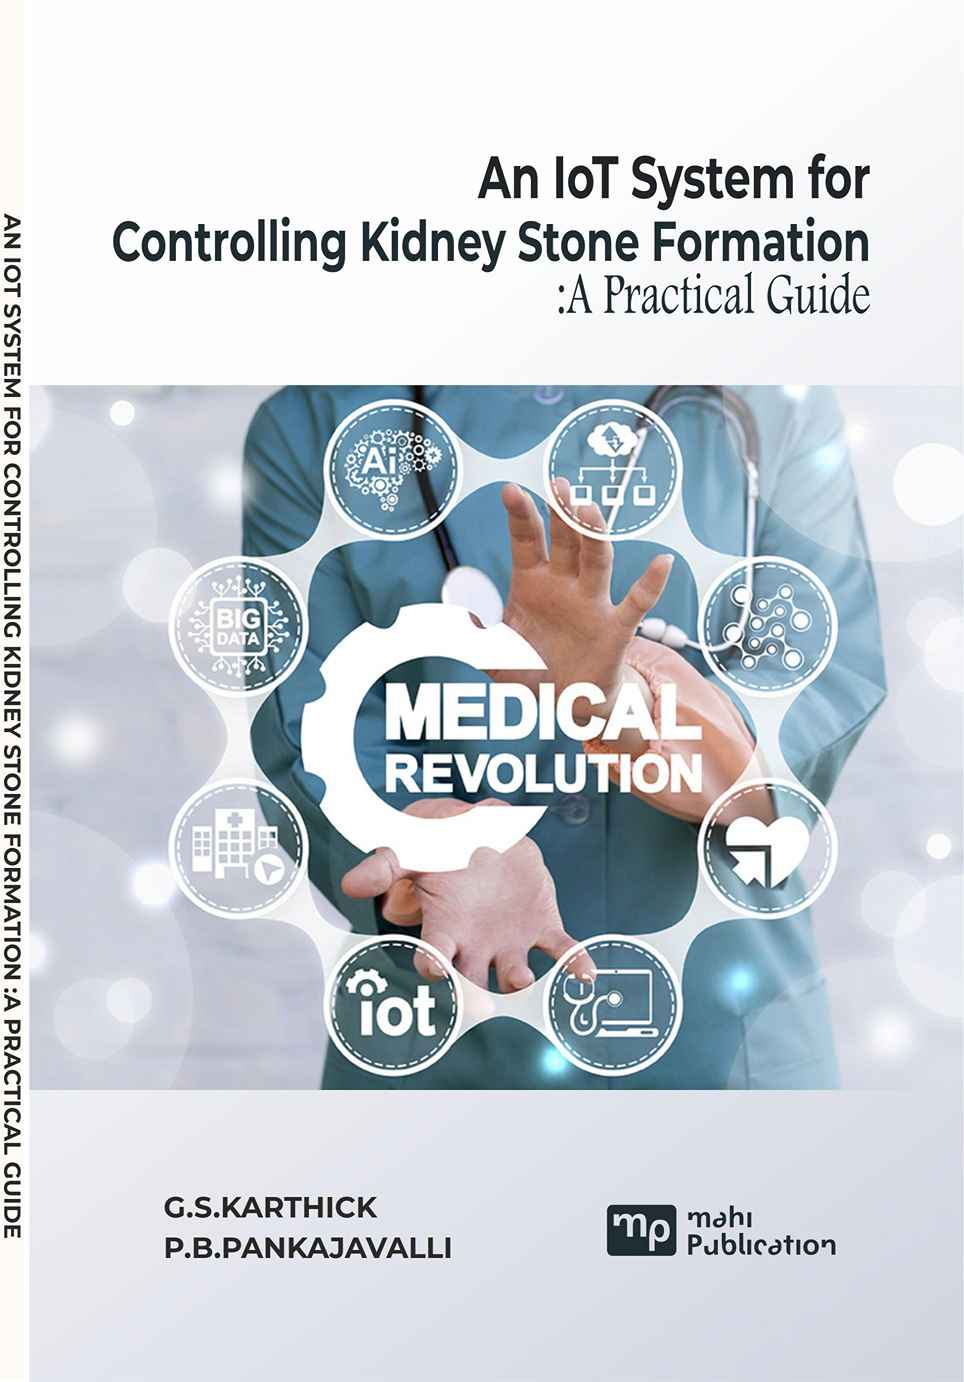 An IOT System for Controlling the Stone Formation in Kidney Through Urine PH Level Monitoring a Practical Guide